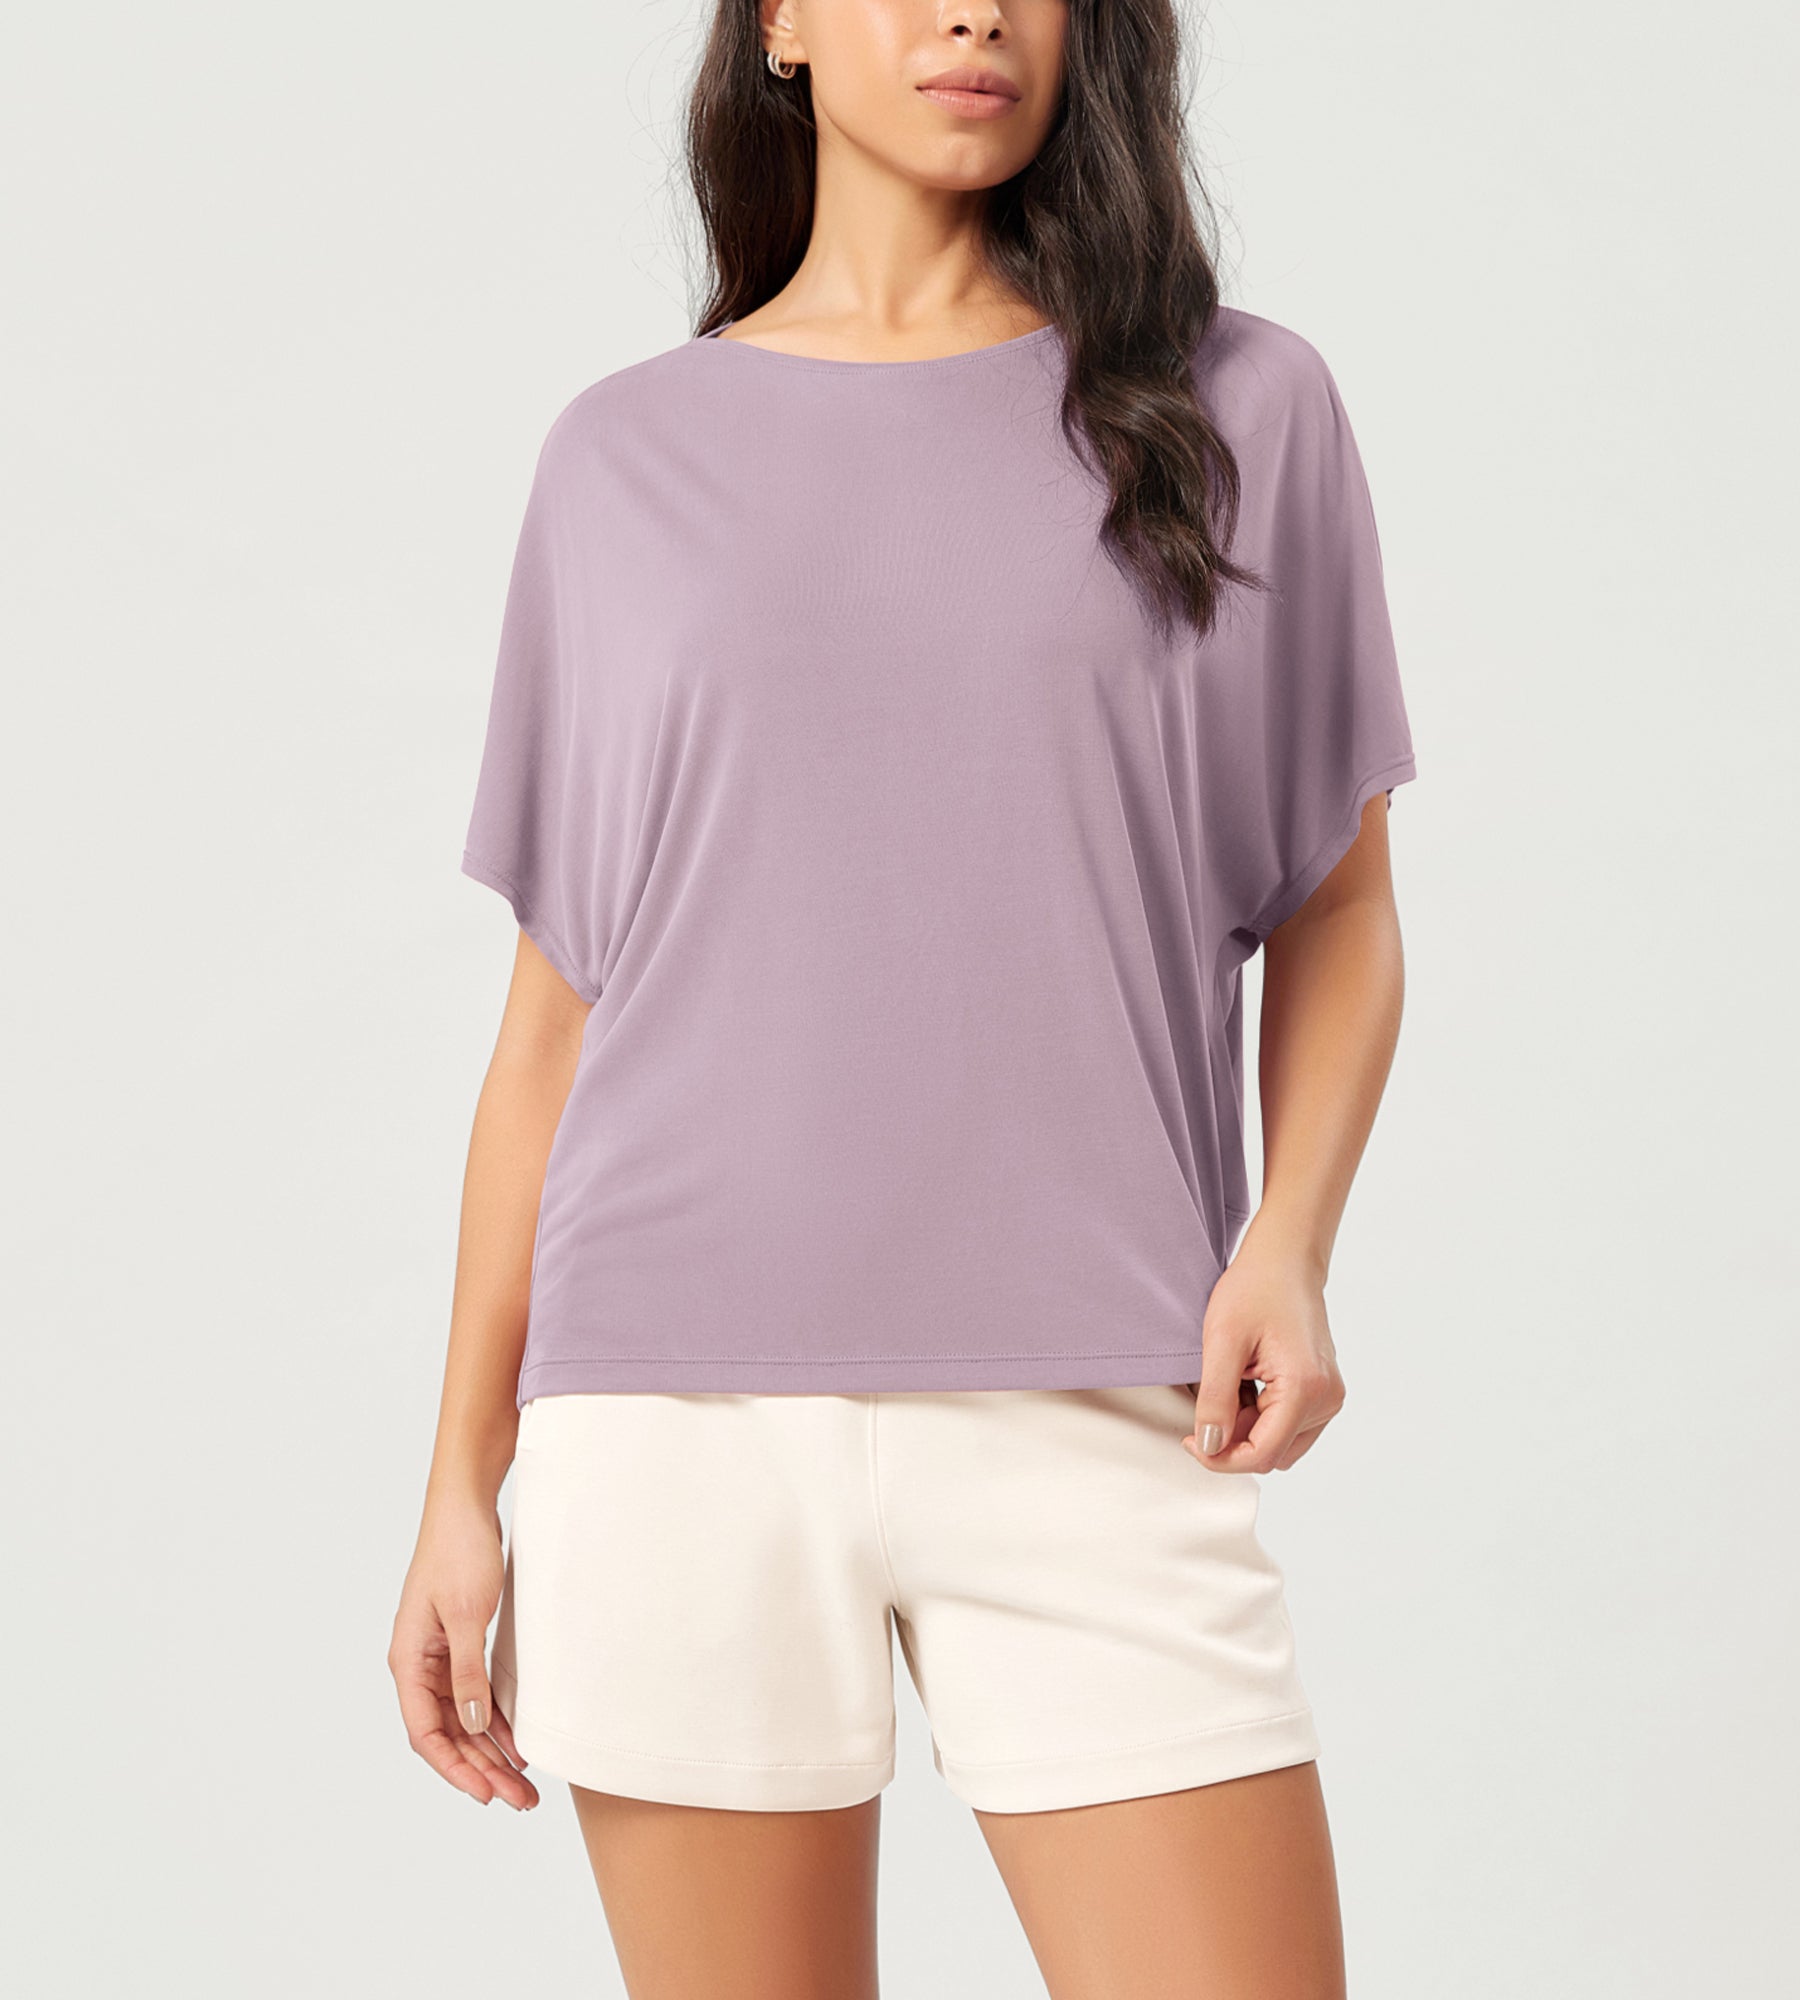 Modal Soft Boat Neck Casual Batwing Tee Shirts Lavender - ododos